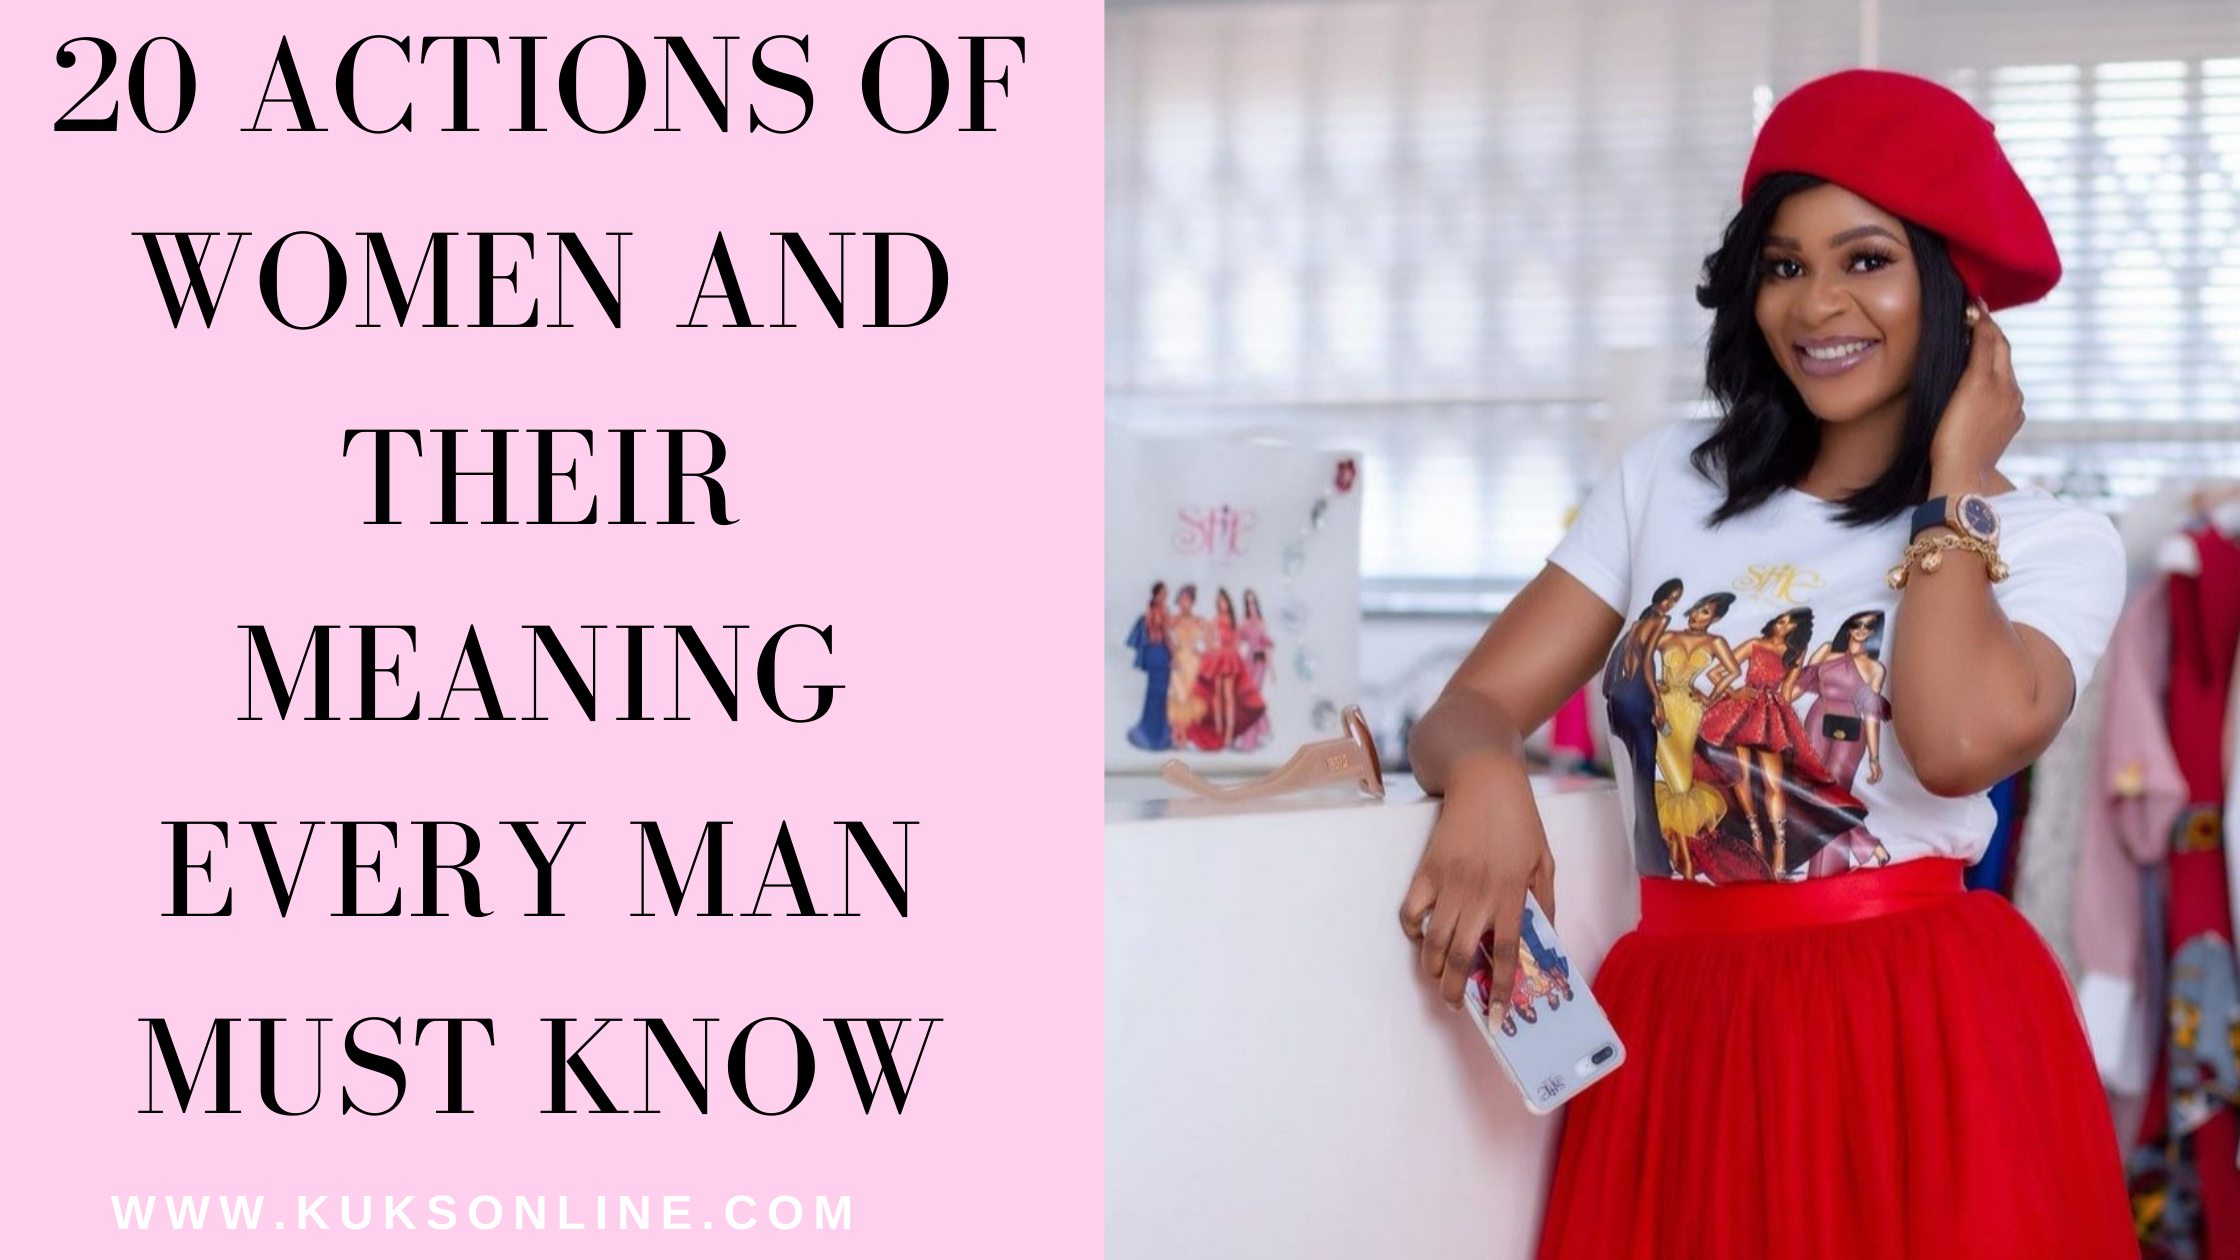 In this article we share with you 20 actions and their meaning every man must know before marriage.